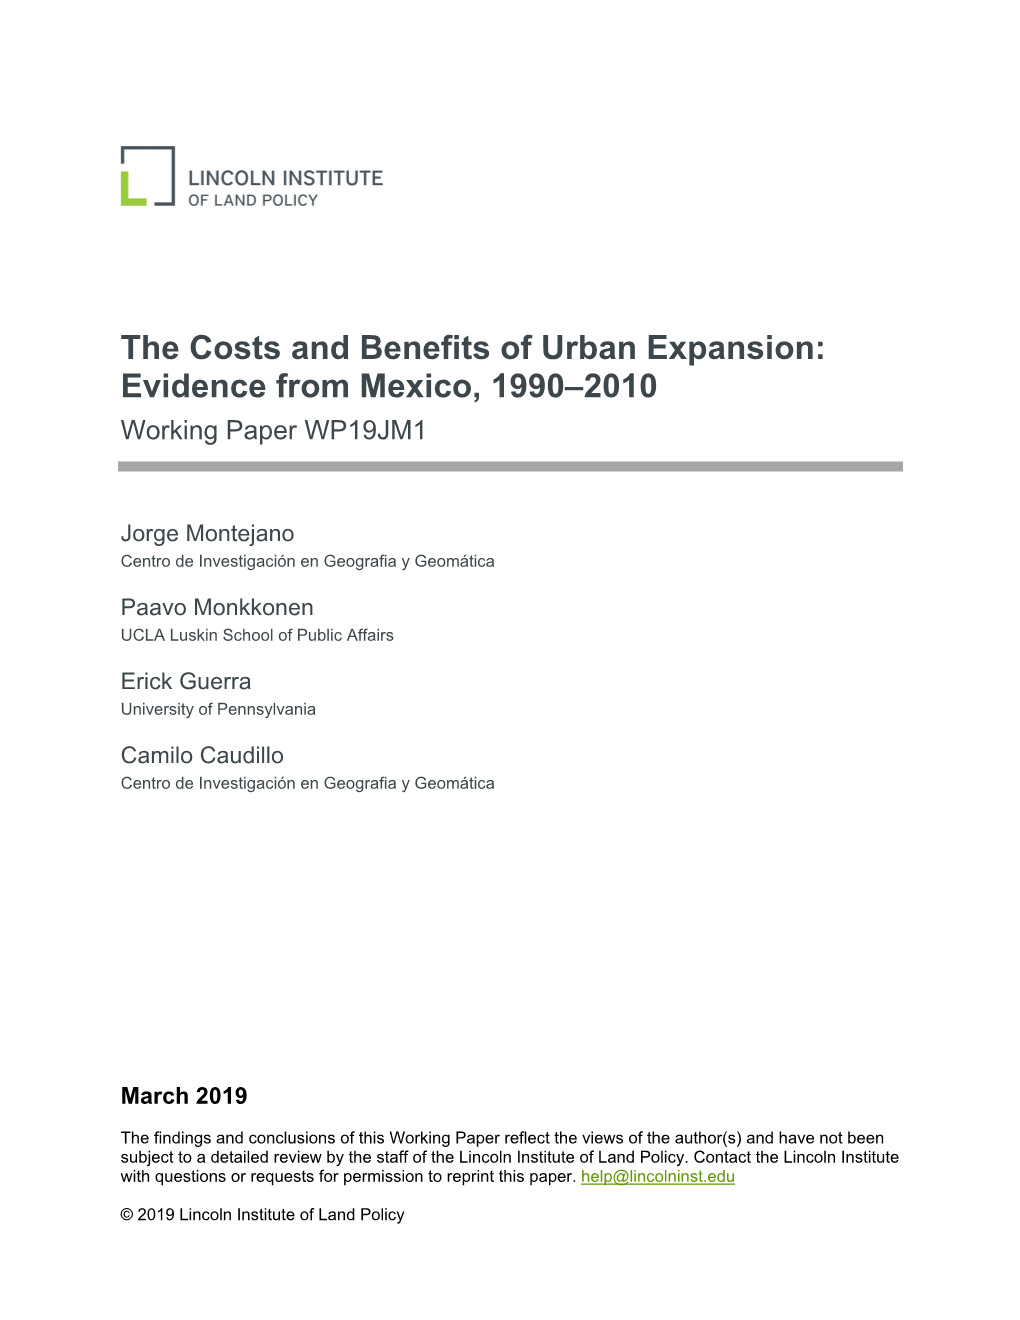 The Costs and Benefits of Urban Expansion: Evidence from Mexico, 1990–2010 Working Paper WP19JM1